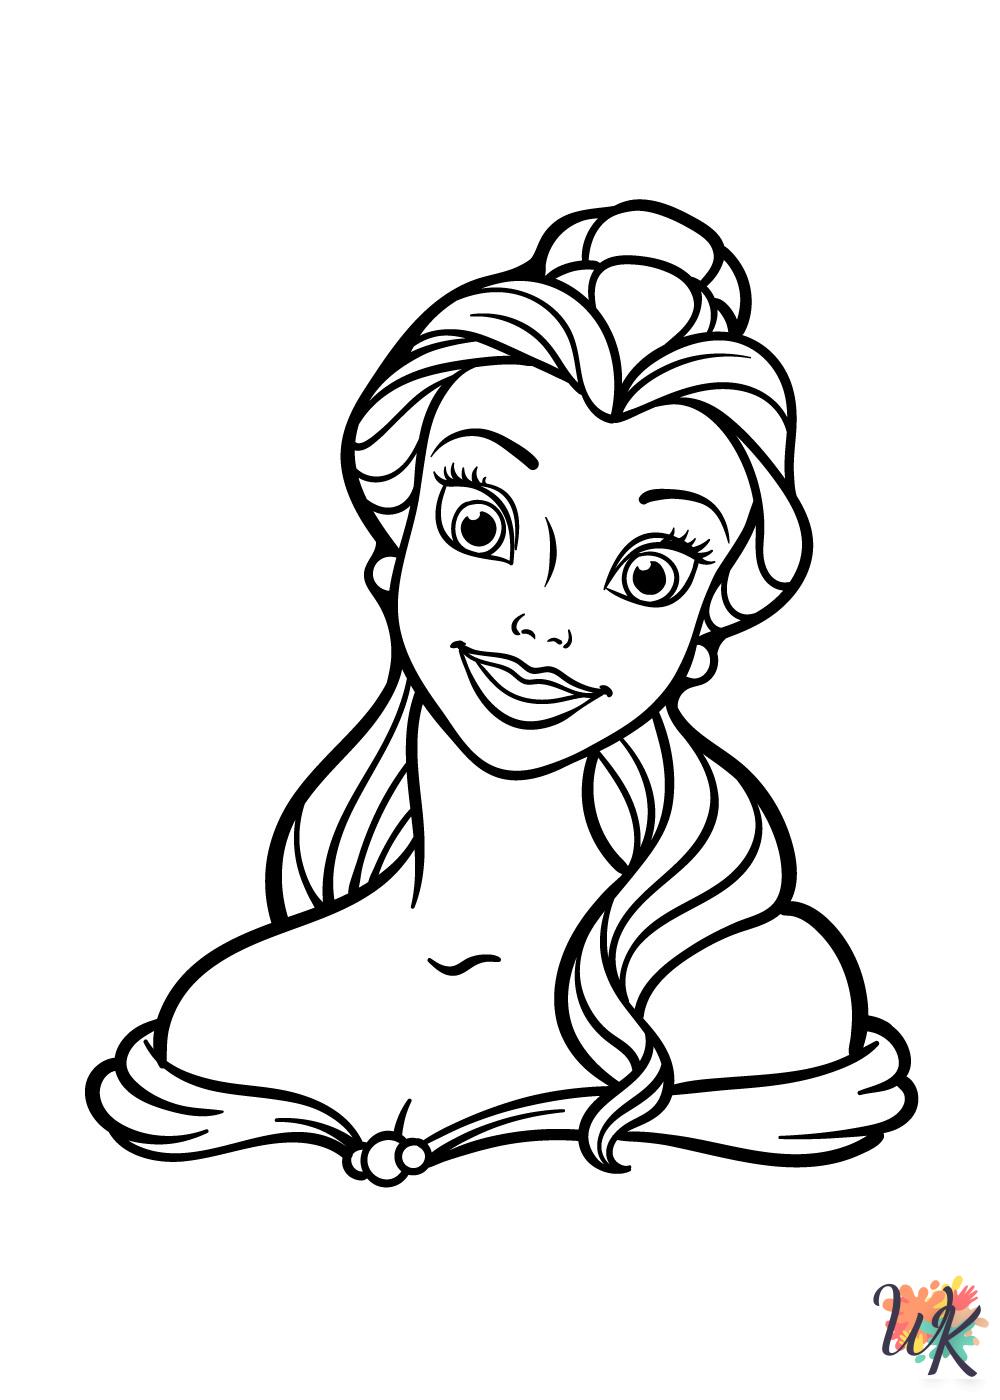 Belle coloring pages for adults easy